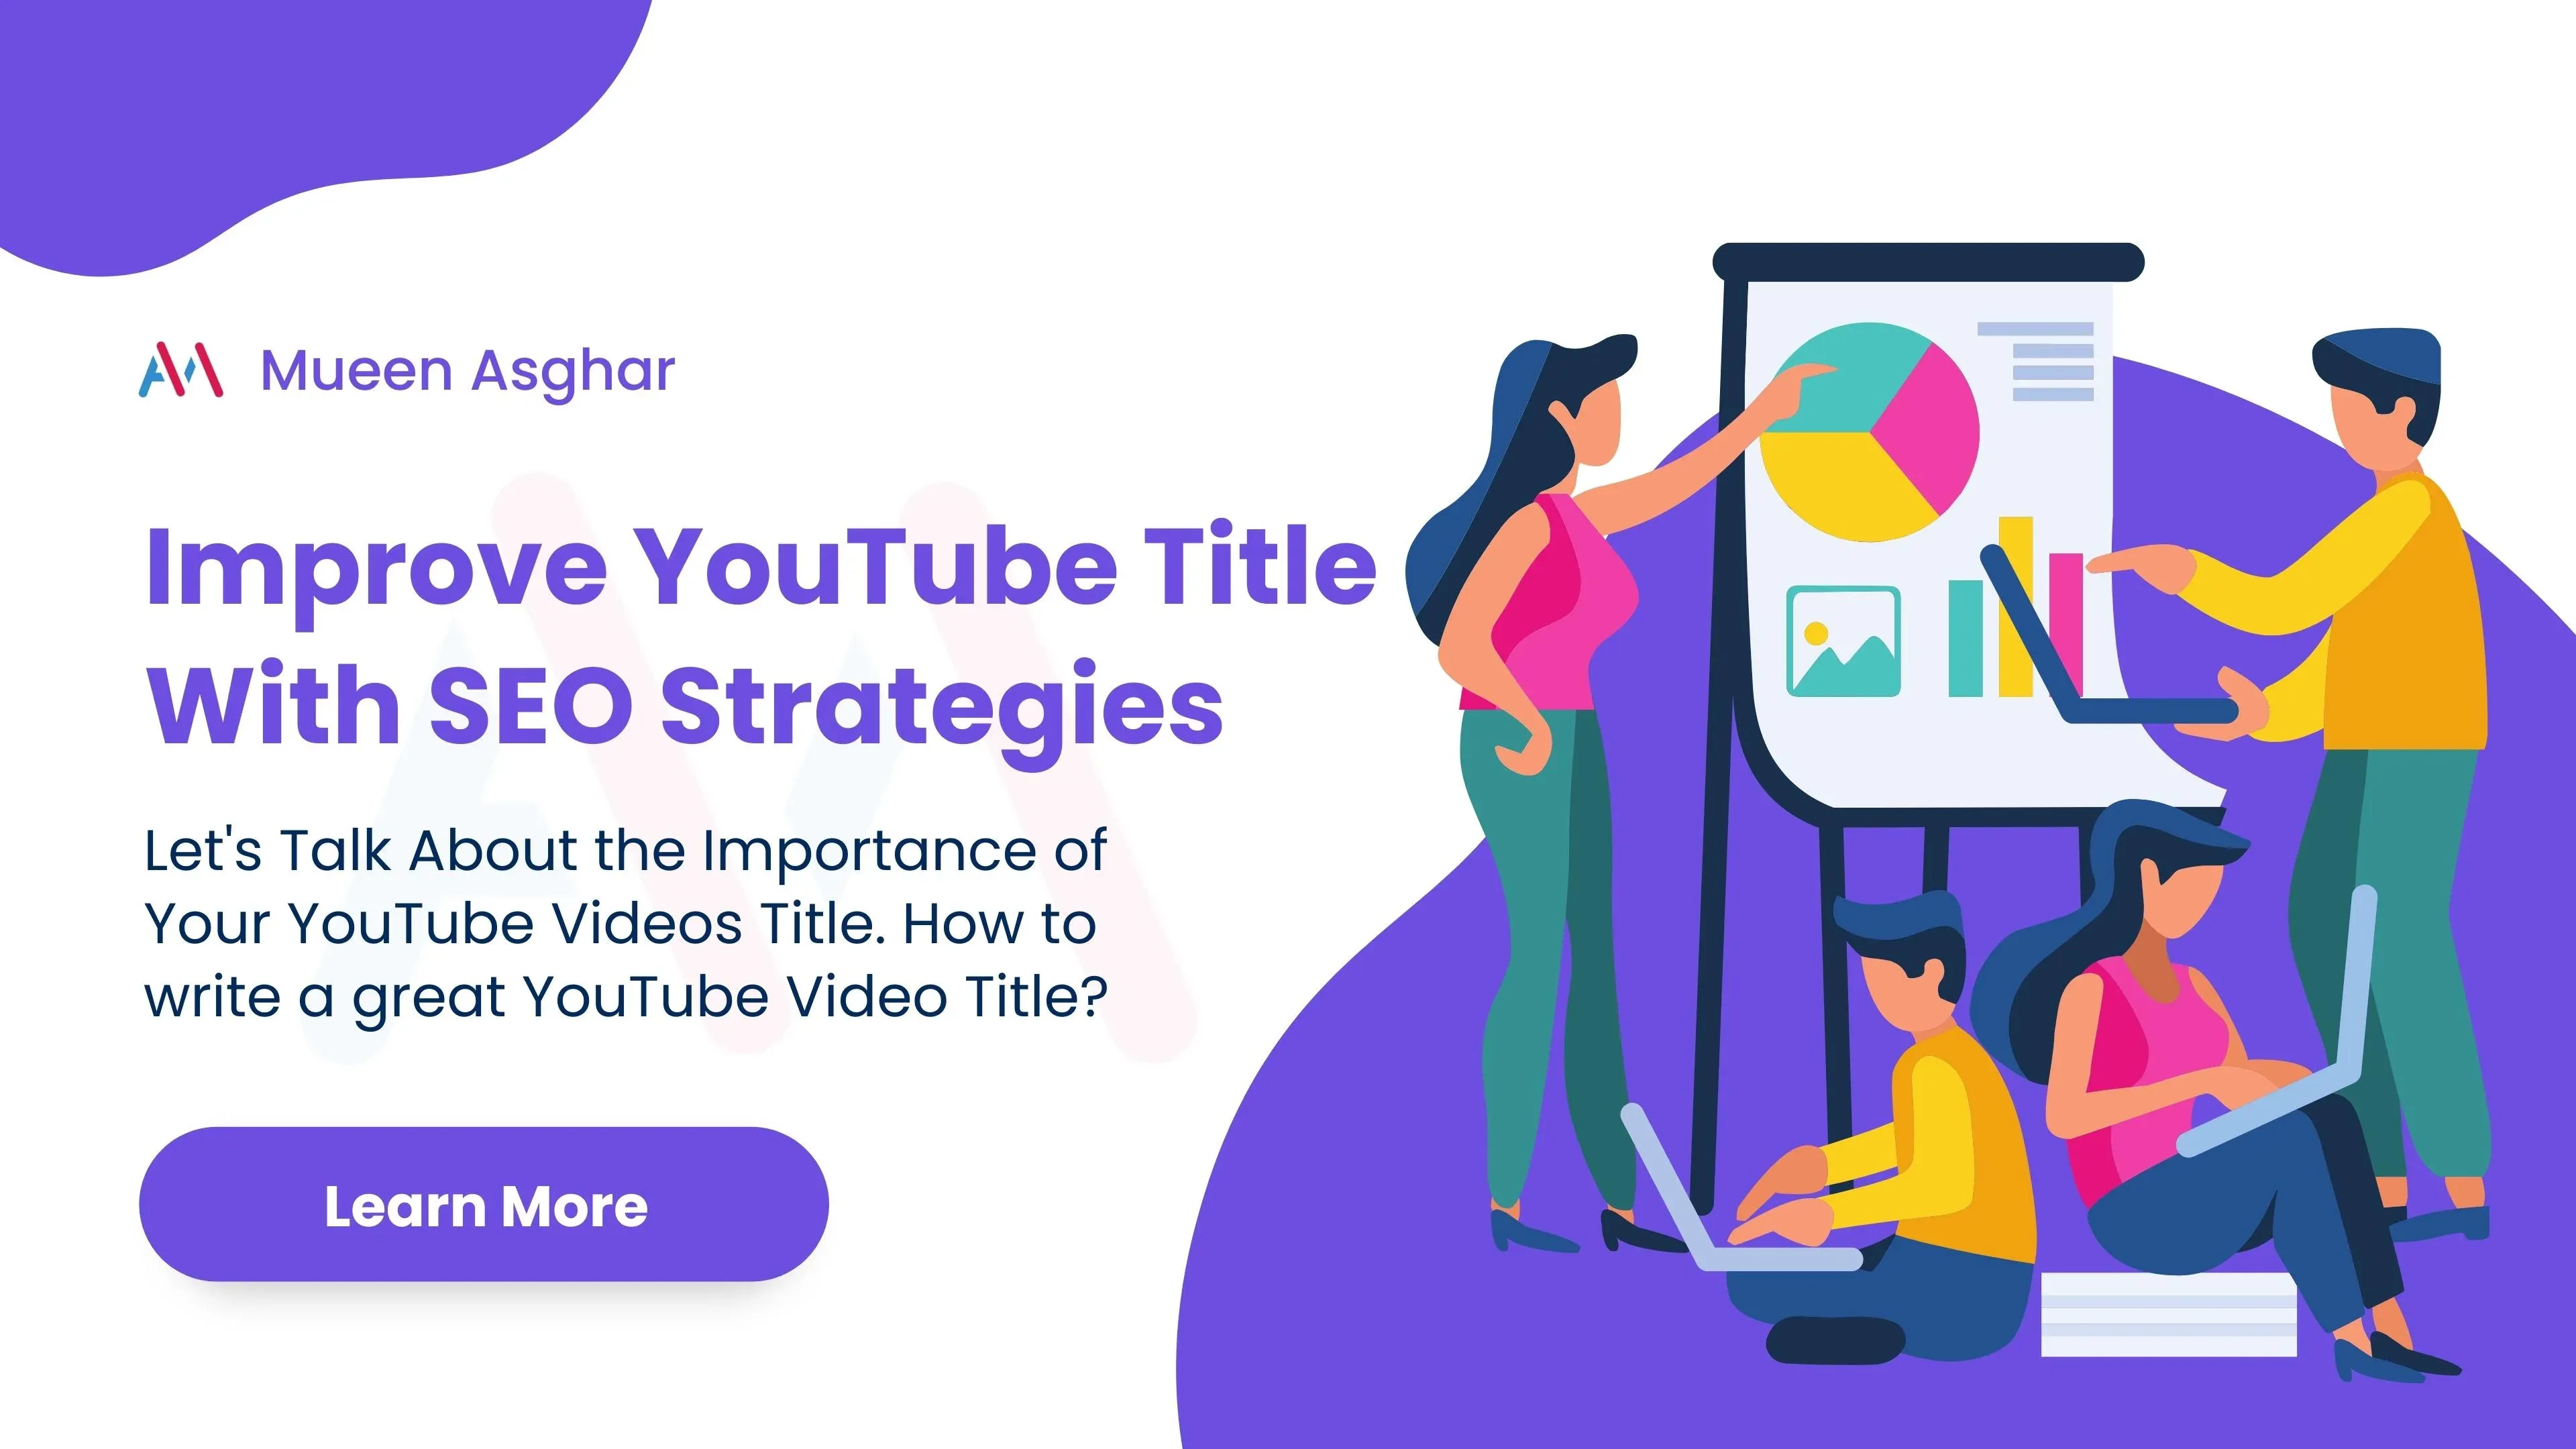 How To Title Your YouTube Videos To Get More Views - 9 Strategies